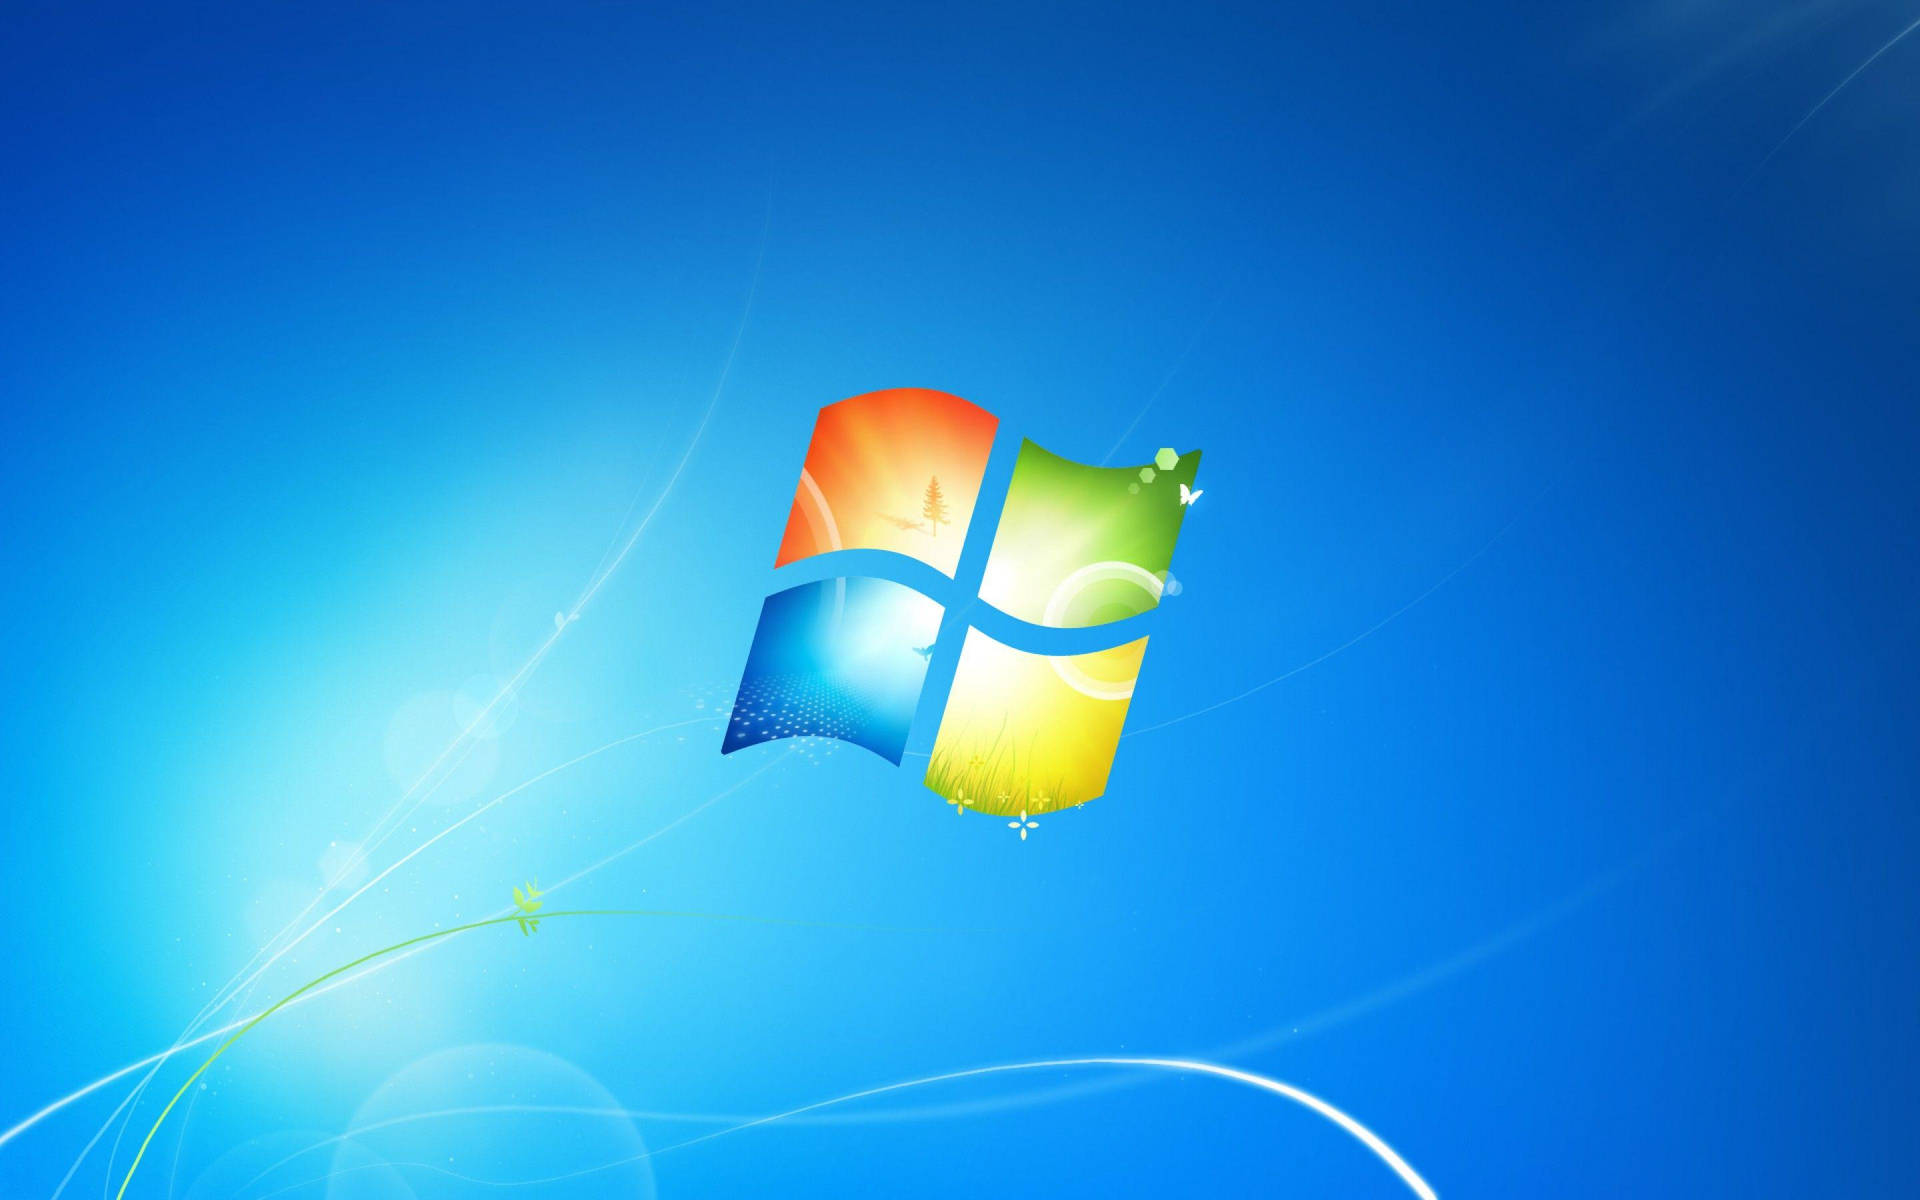 Microsoft 2880X1800 Wallpaper and Background Image